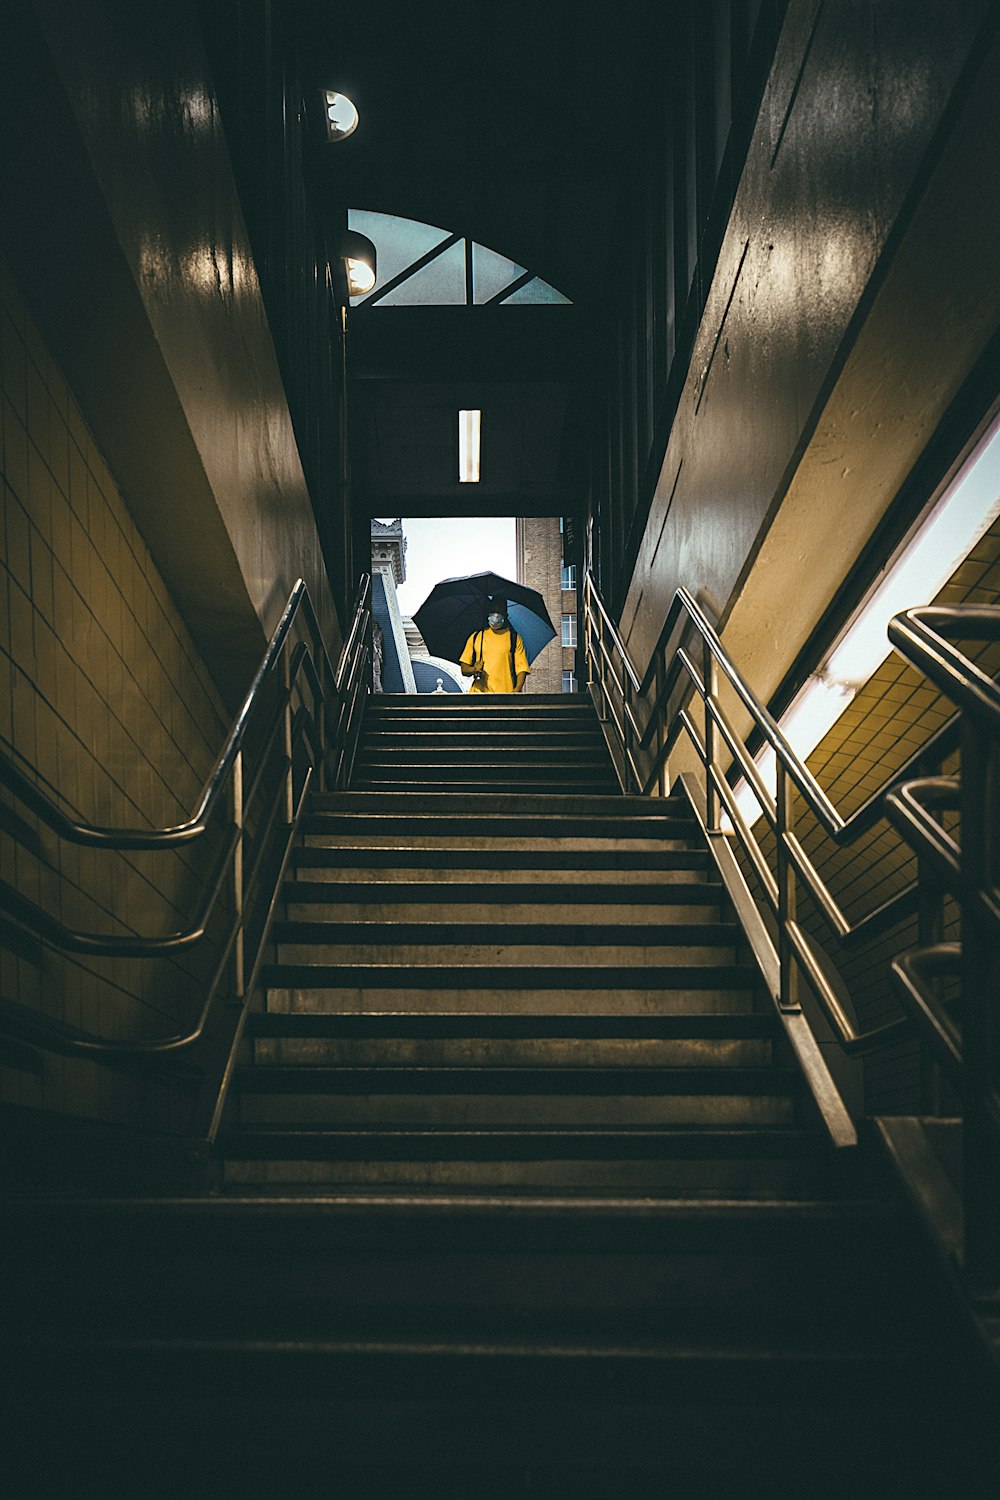 a person with an umbrella walking down a flight of stairs